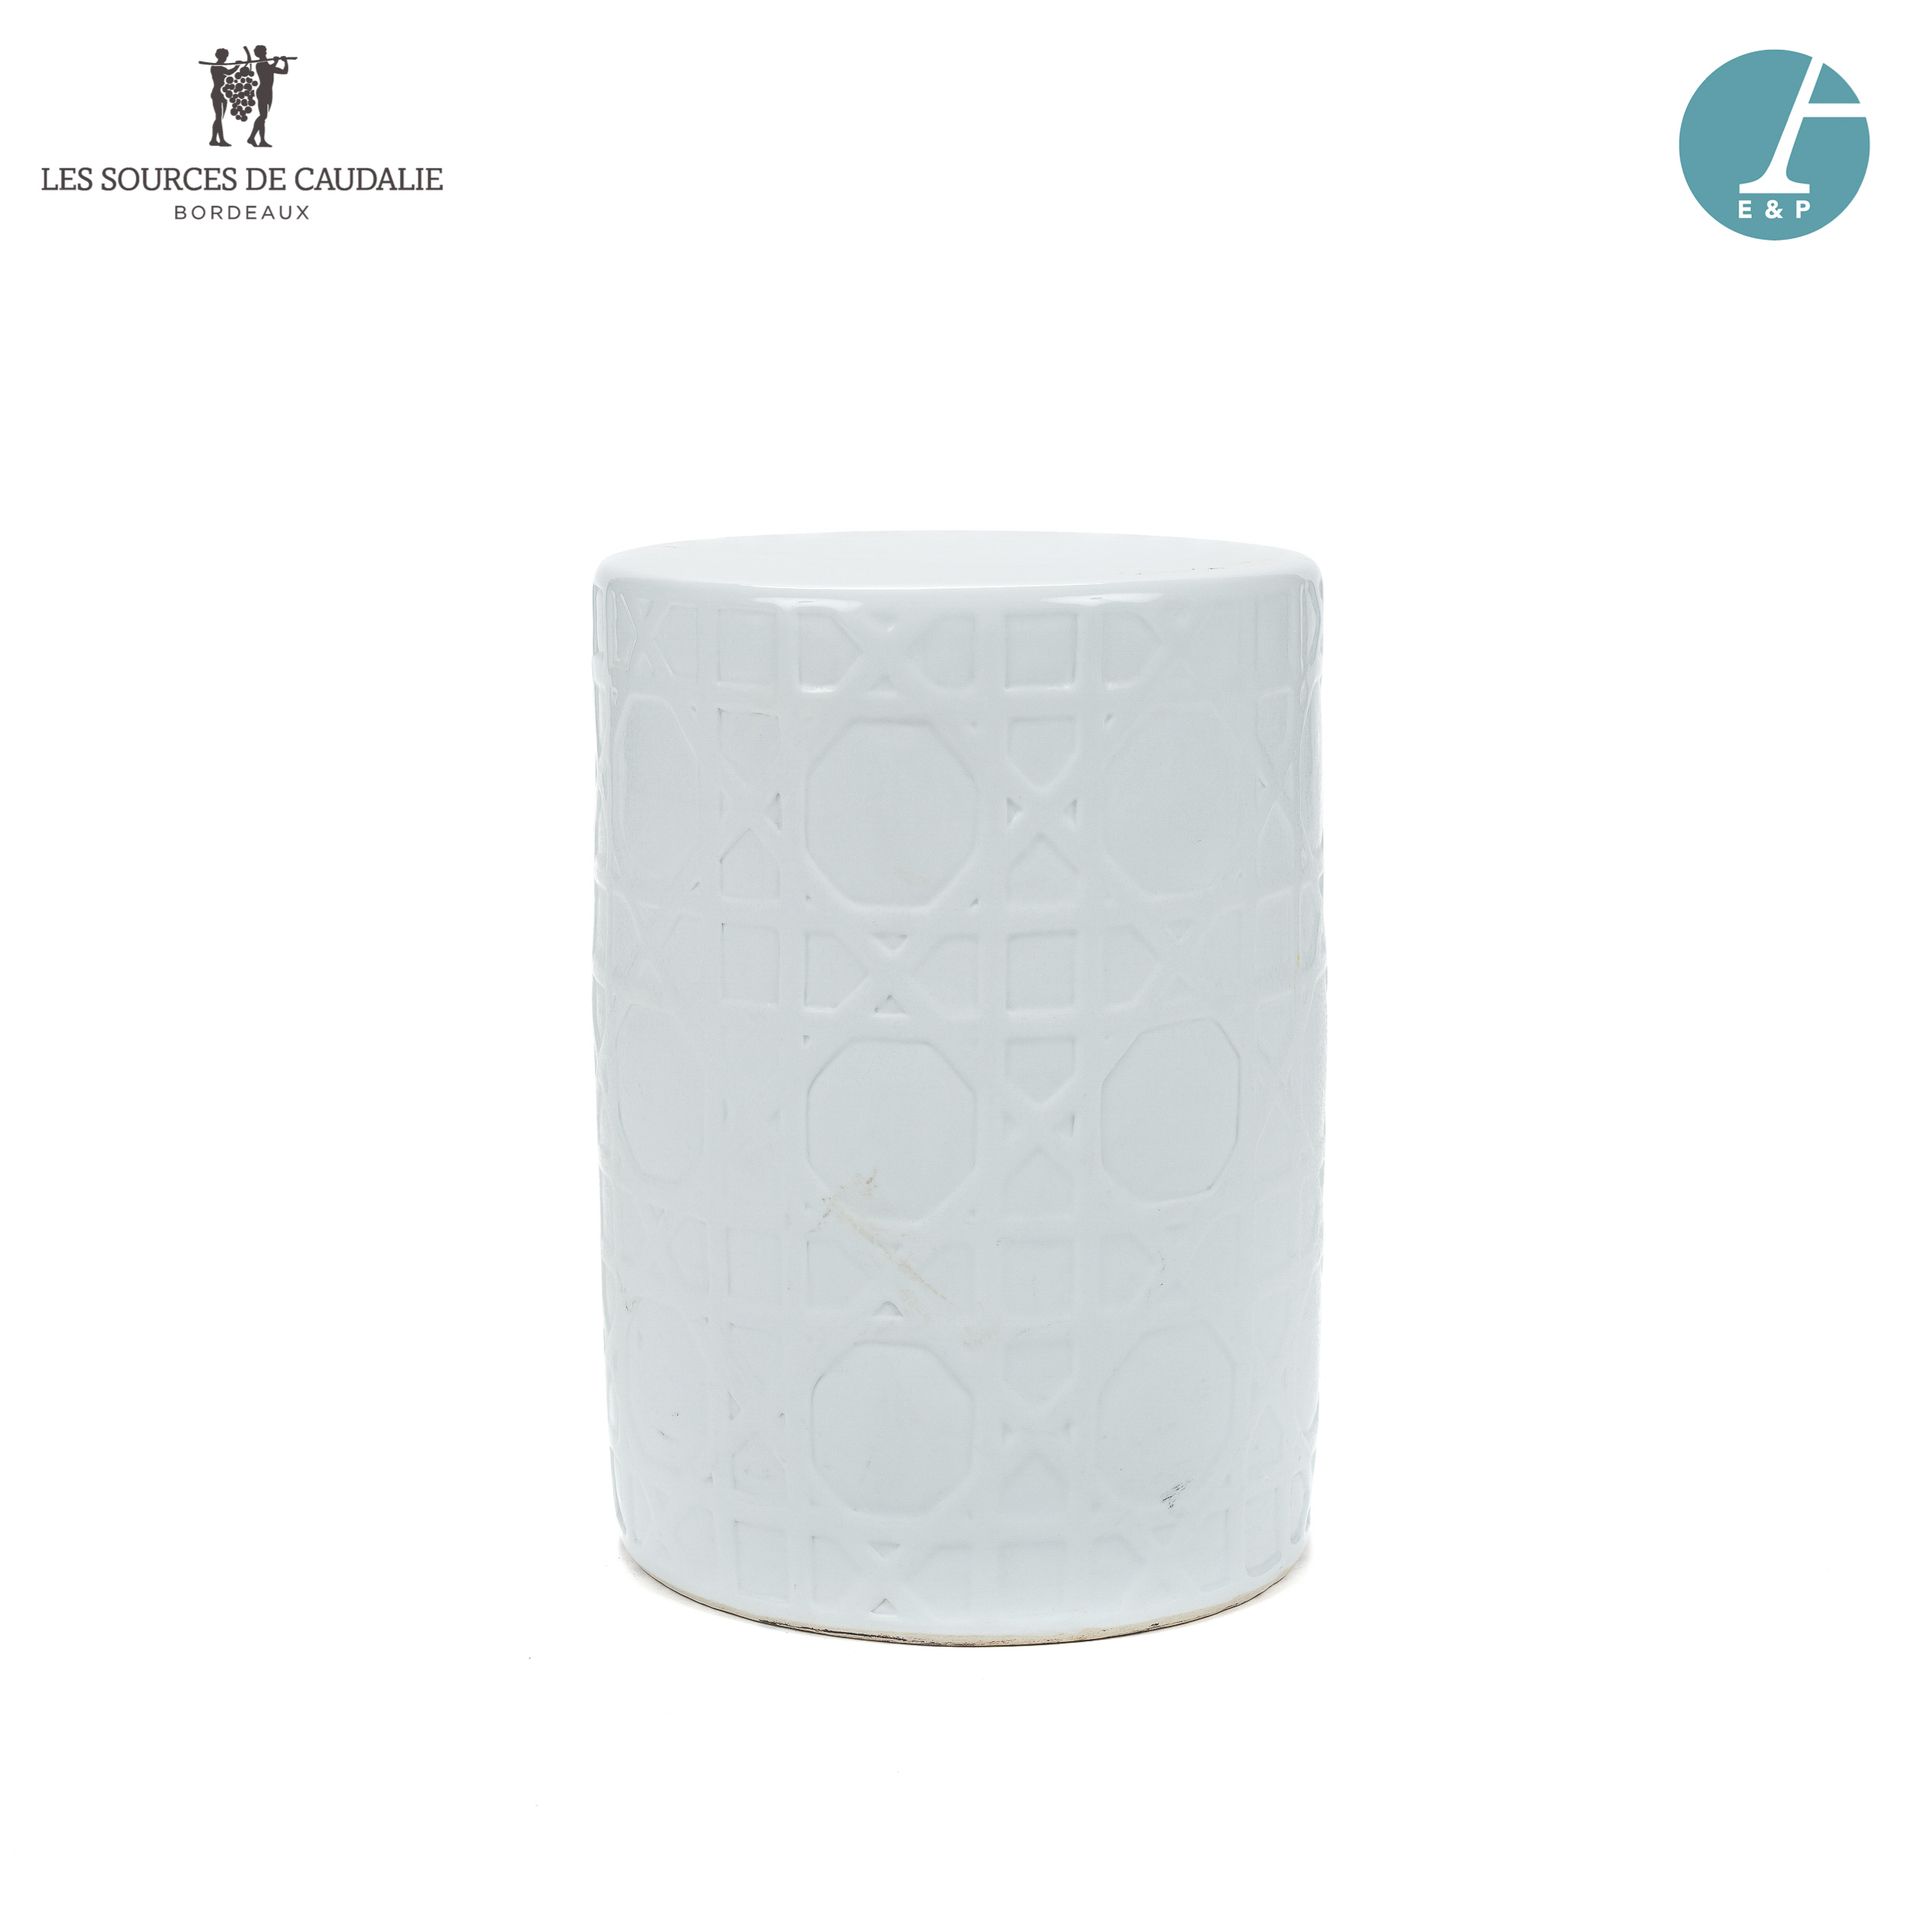 Null From the room n°5 "Le Tonnelier

White (slightly bluish) ceramic stool with&hellip;